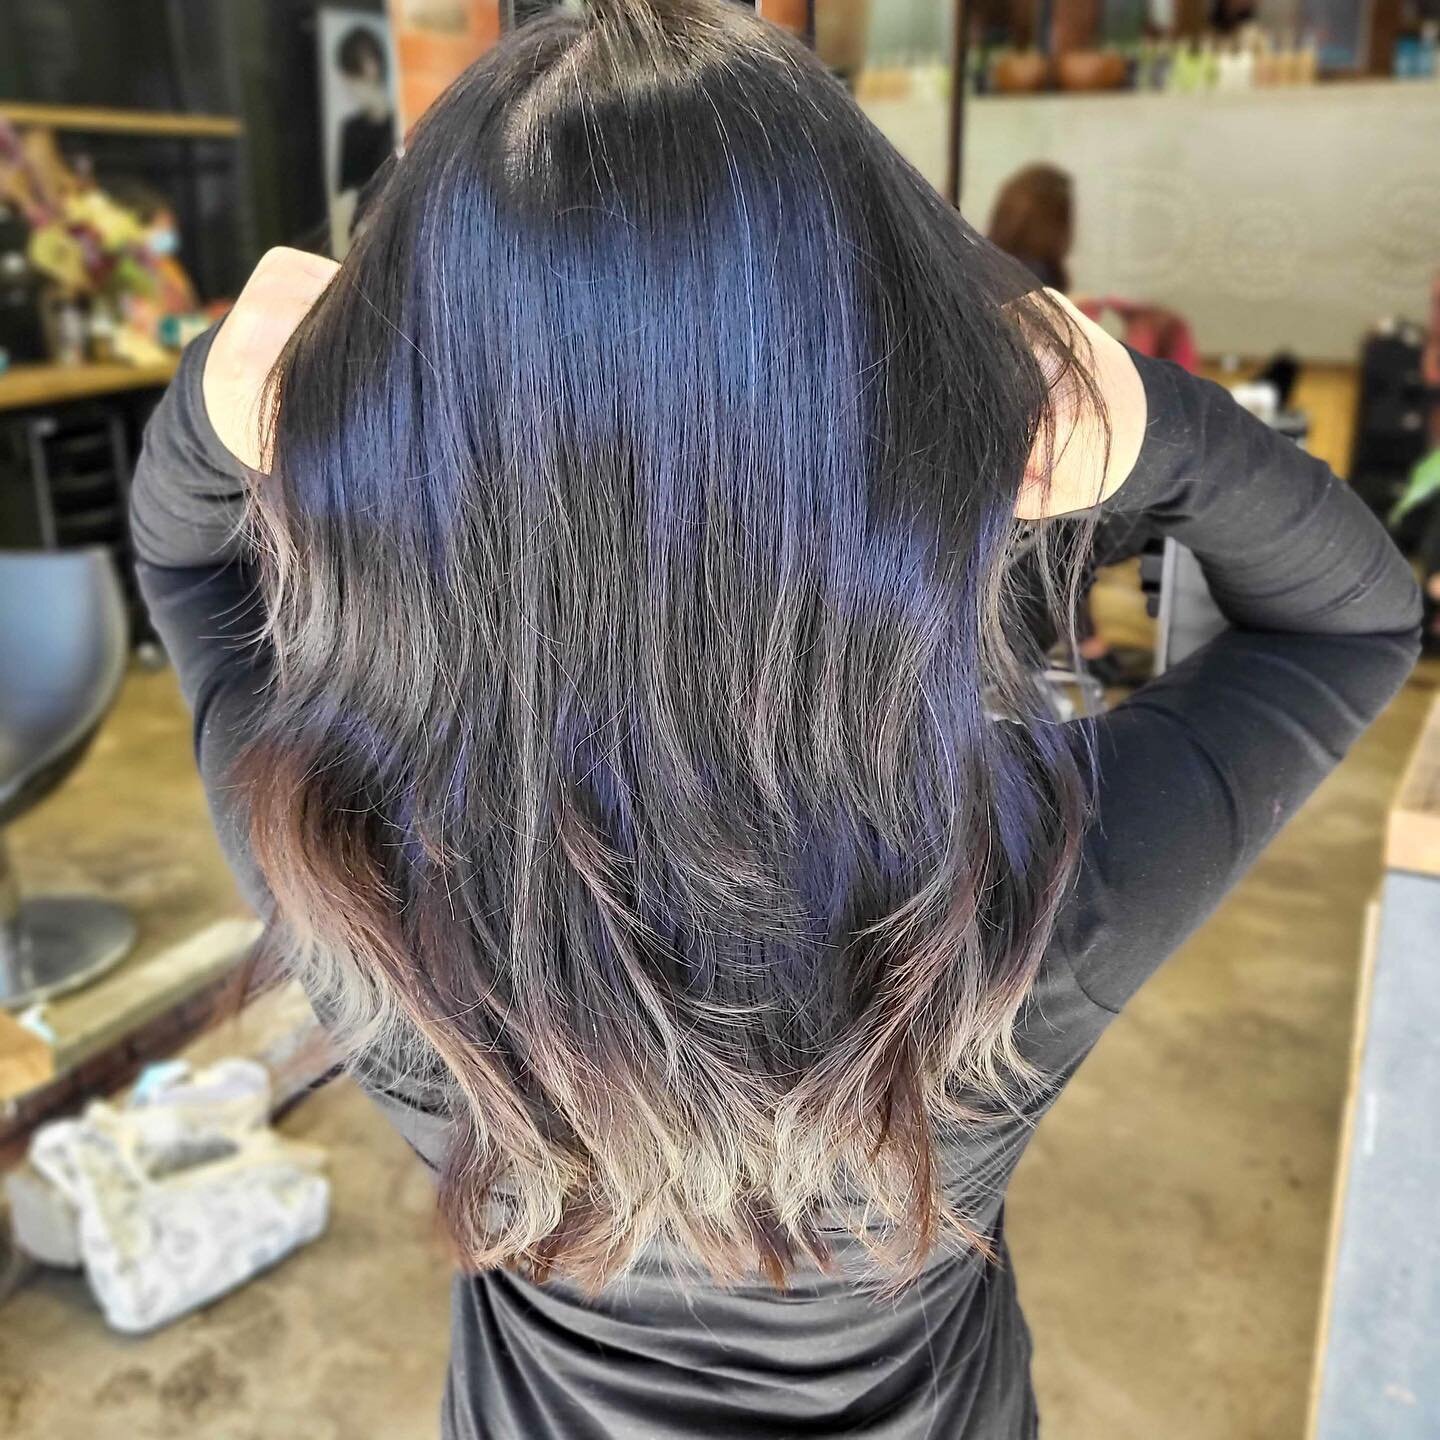 And just like that, Jodie's hair looks like it has literally been brought to life. Adding layers in your hair creates &quot;movement&quot; and &quot;bounce&quot; - making it look more full and energetic! Even more exciting, it was Jodie's first ever 